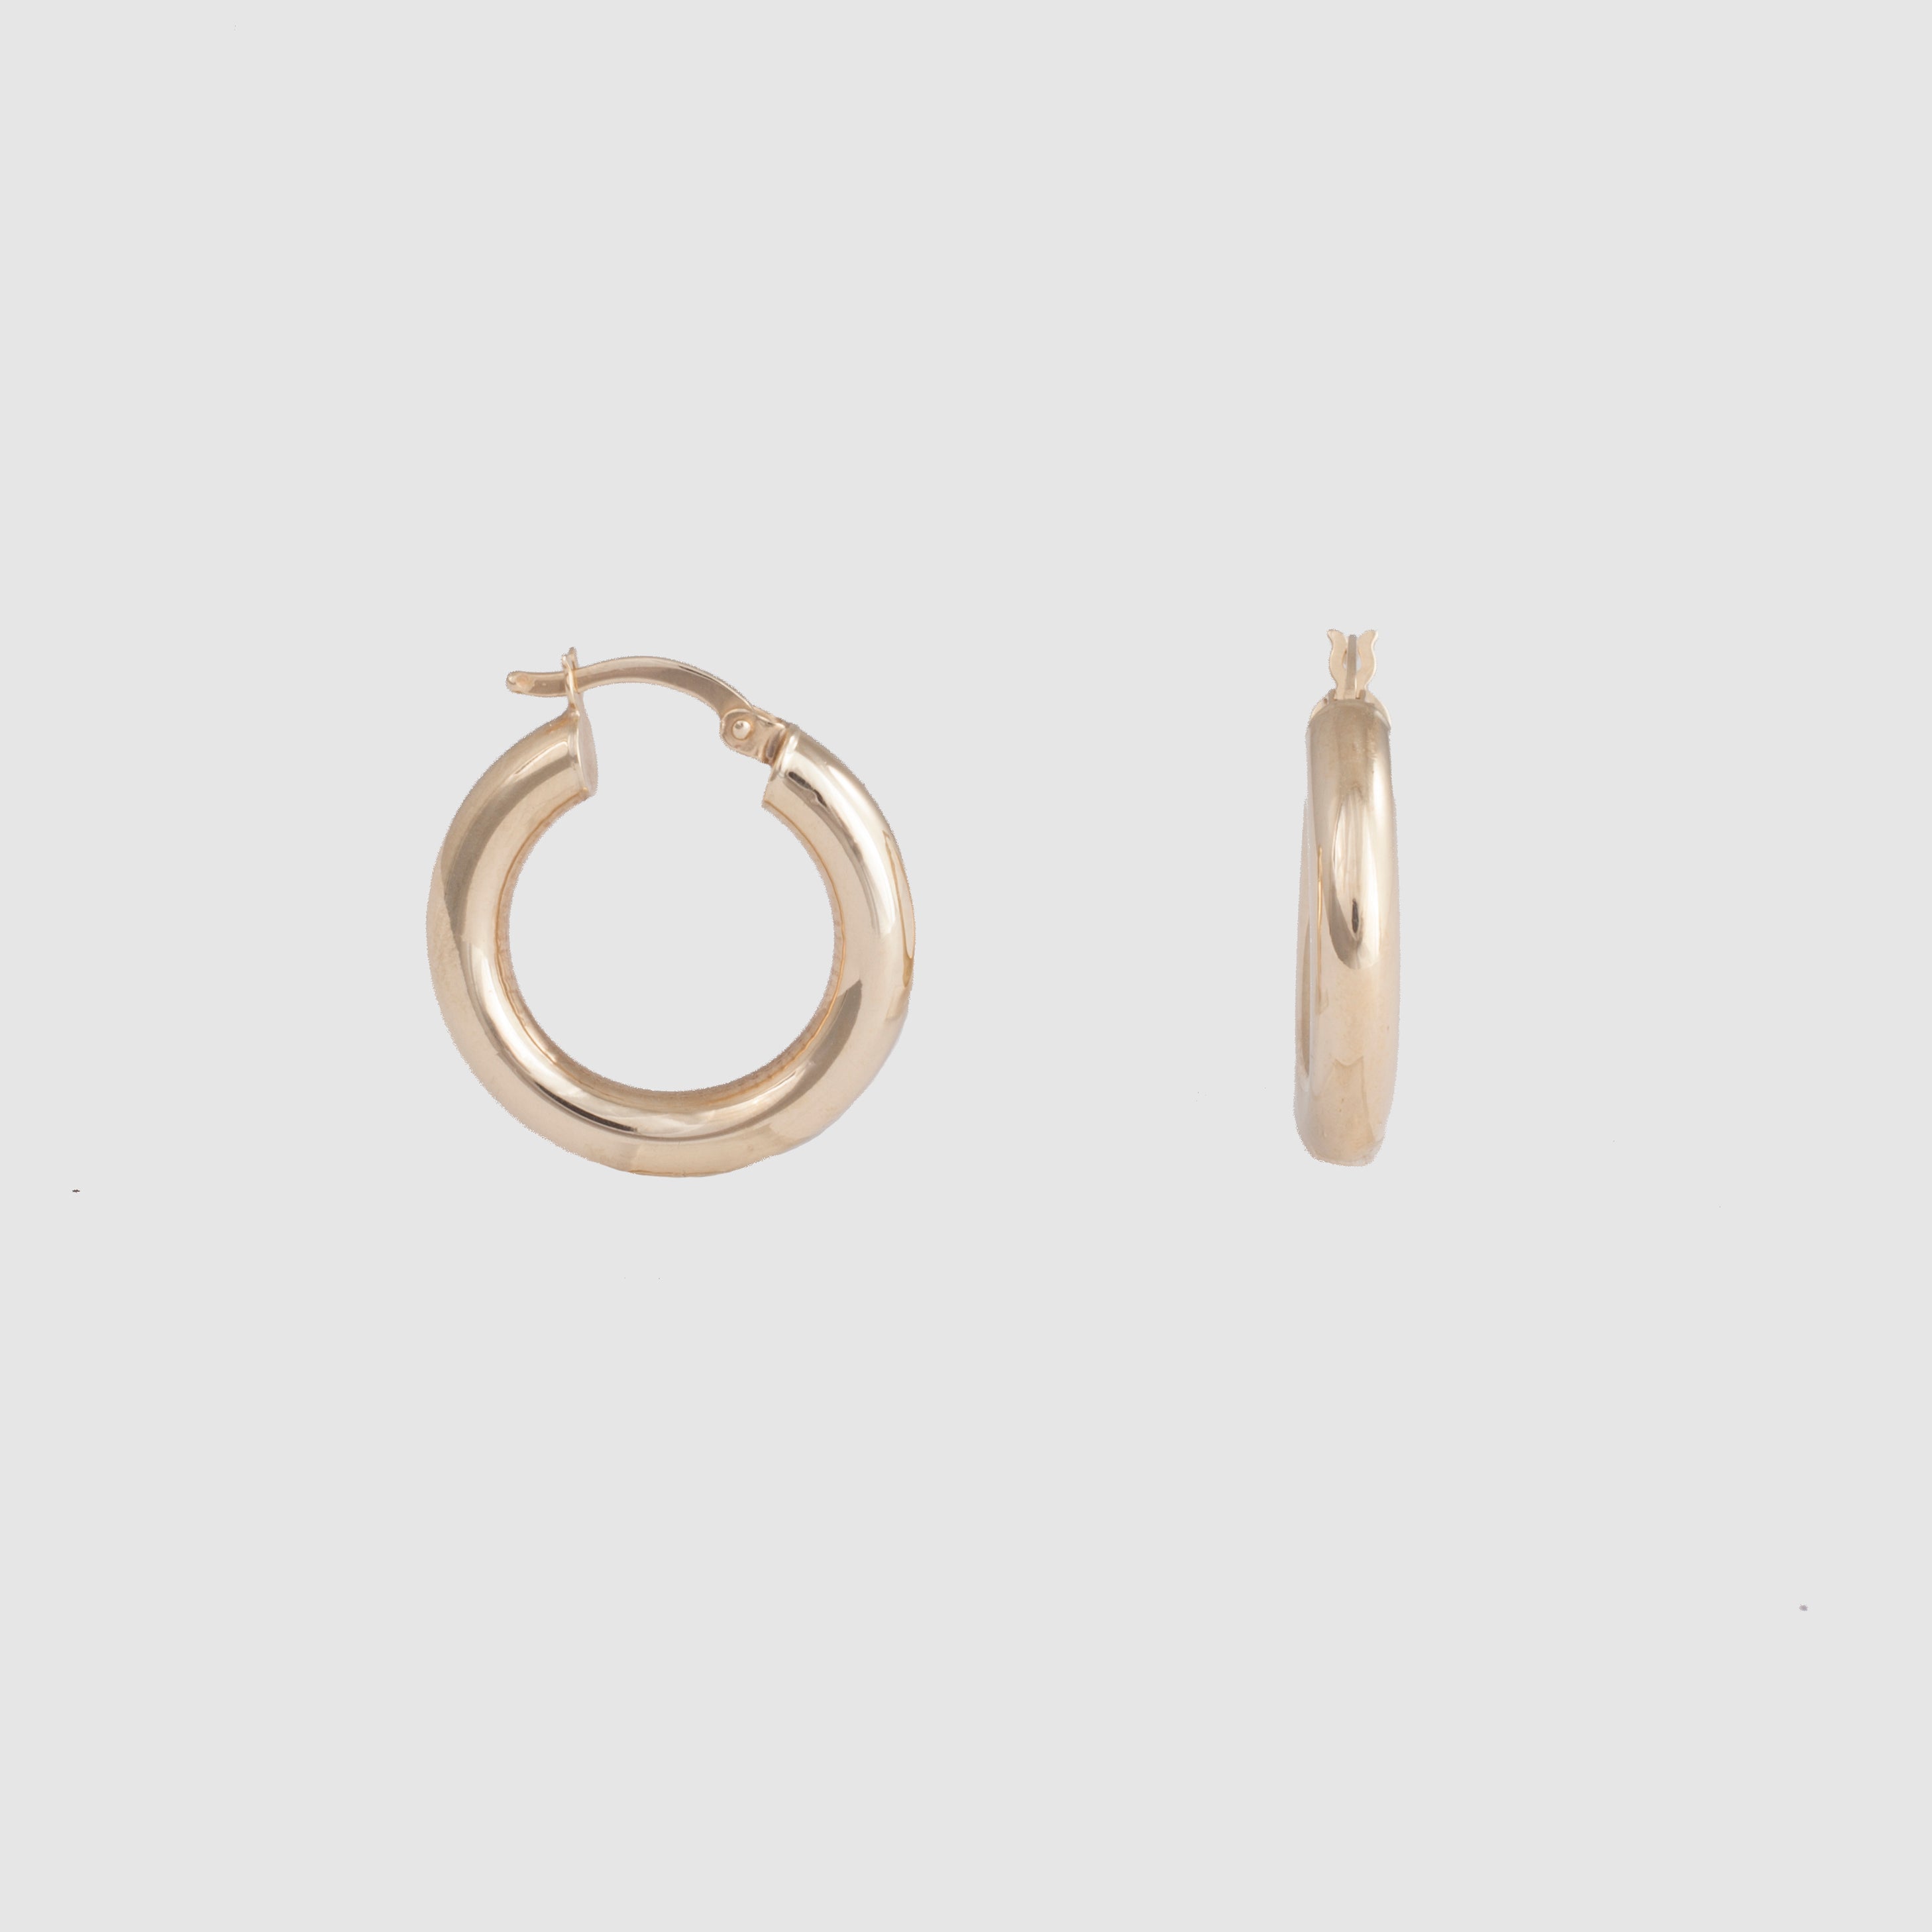 Large thick 10k solid yellow gold hoop earrings